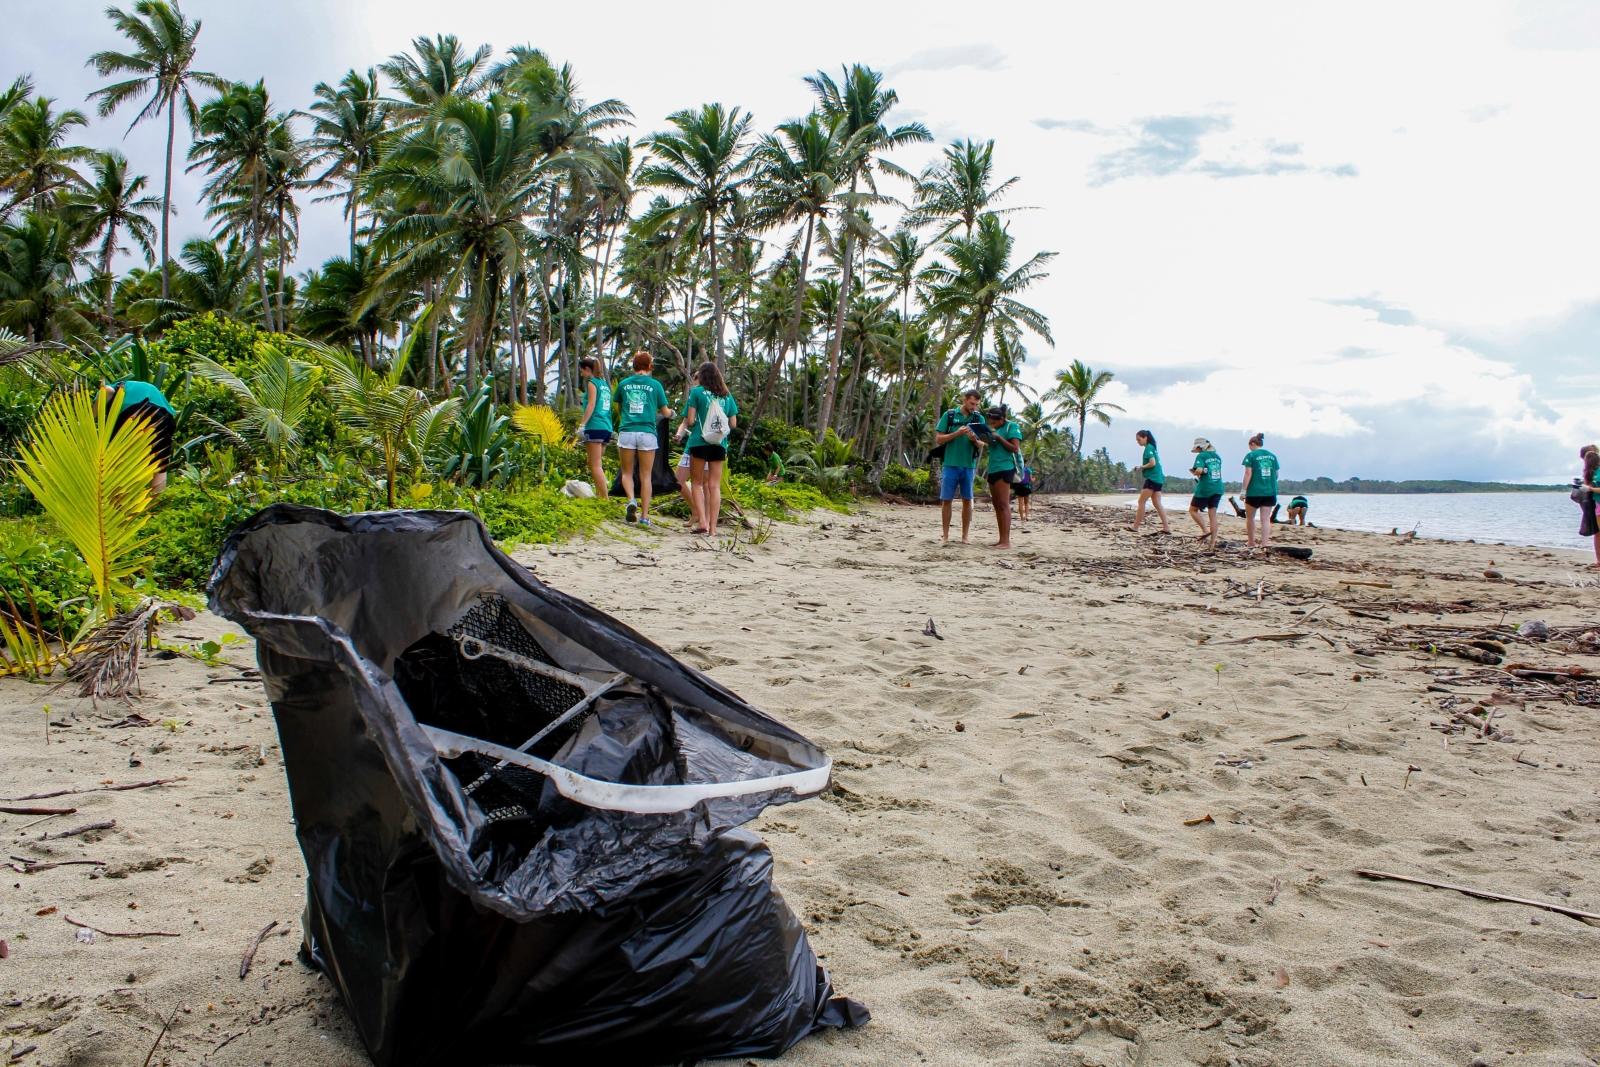 A group of Projects Abroad volunteers helping to tidy up a beach in Thailand